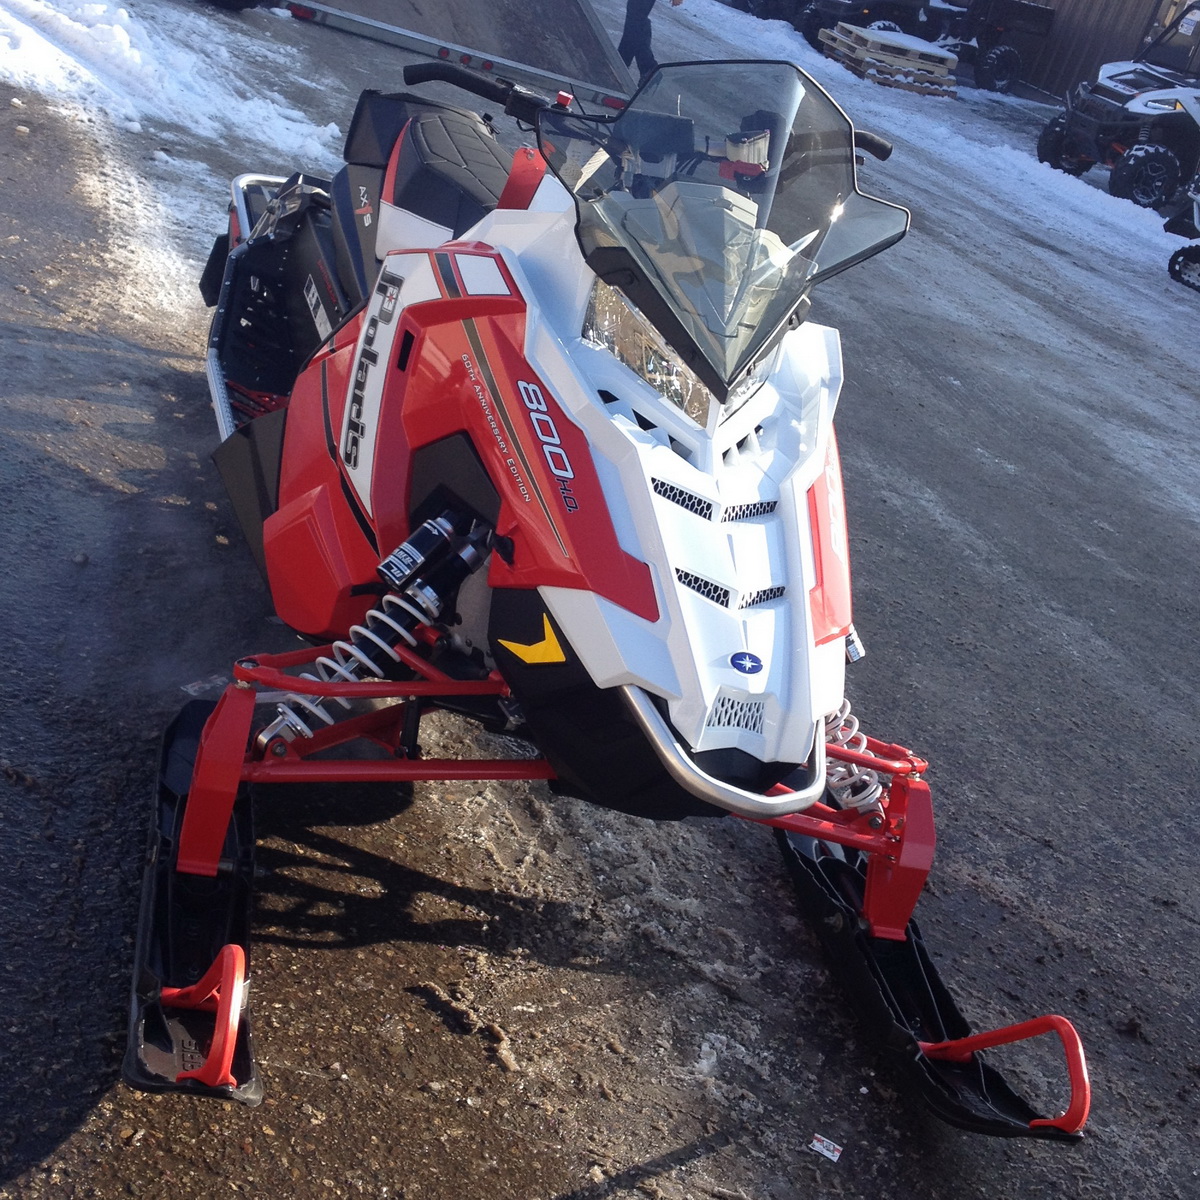 2015 Polaris Switchback 800 60th Anniversary - Early Seat Time ...